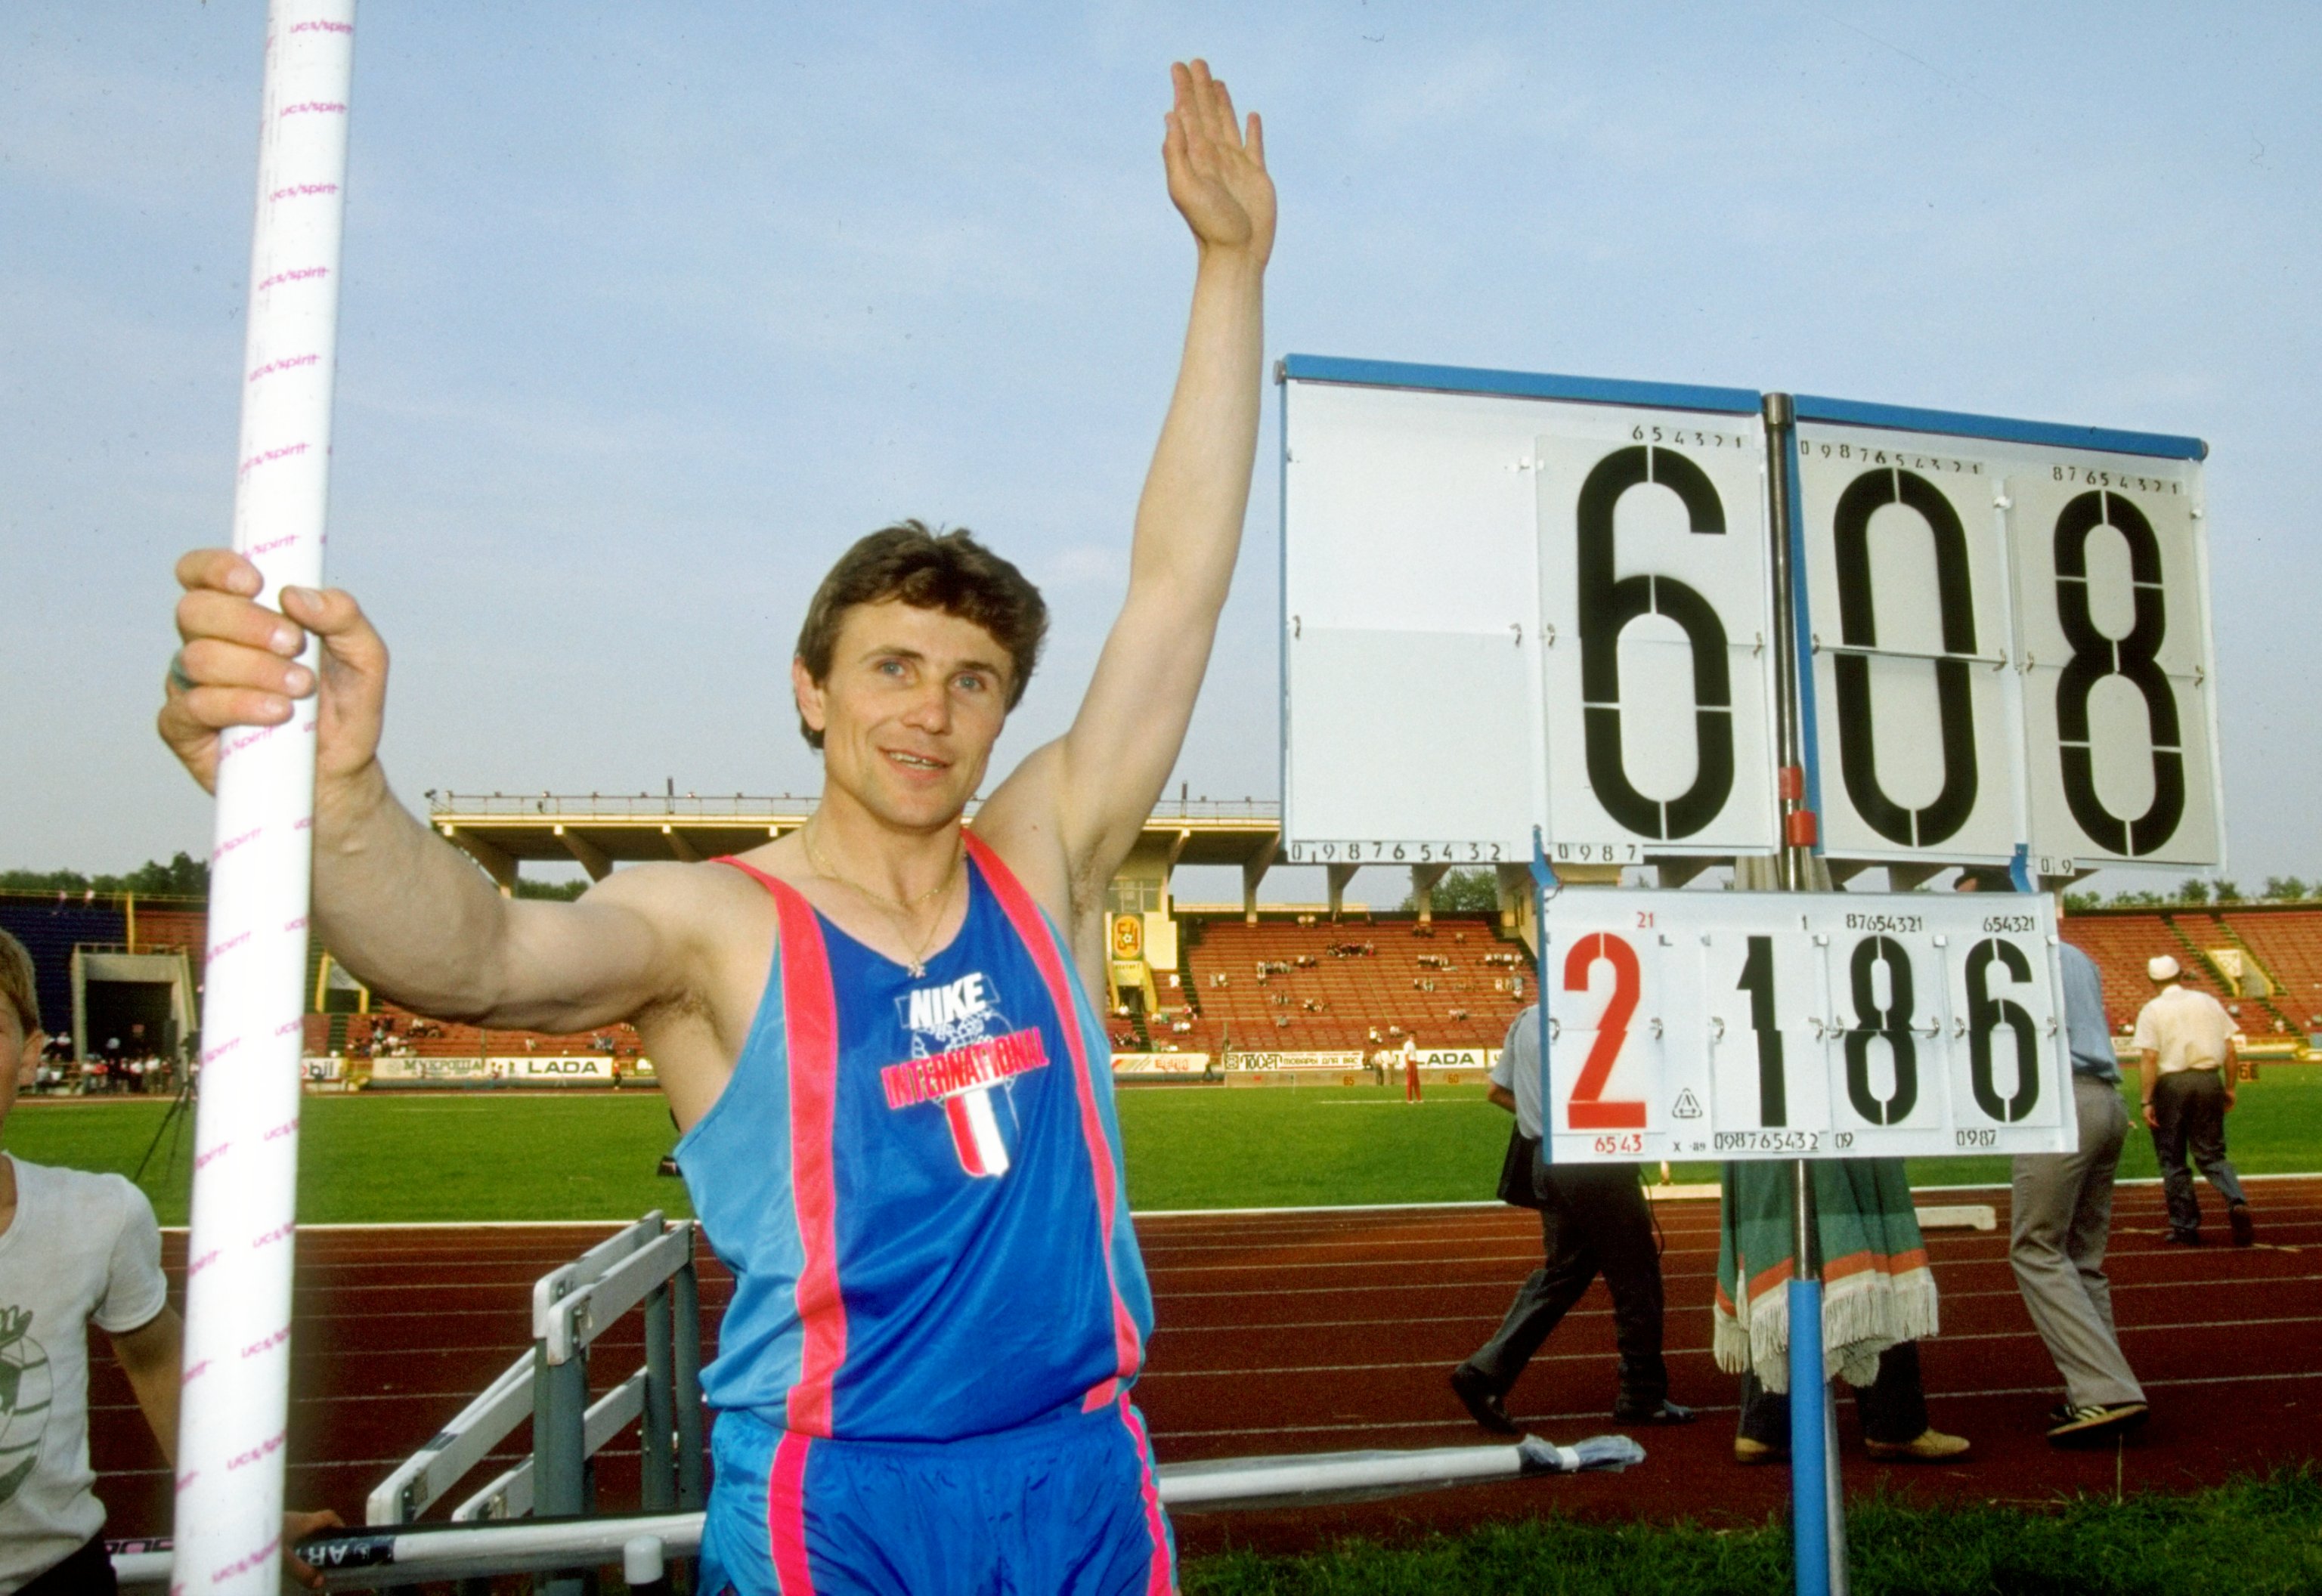 1991:  Sergey Bubka of the USSR celebrates during the Pole Vault event of the IAAF Grand Prix at the Lokomotiv Stadium in Moscow, Russia. Bubka finished in first place with a New World Record height of 6.08 metres. \ Mandatory Credit: Gary  Mortimore/Alls